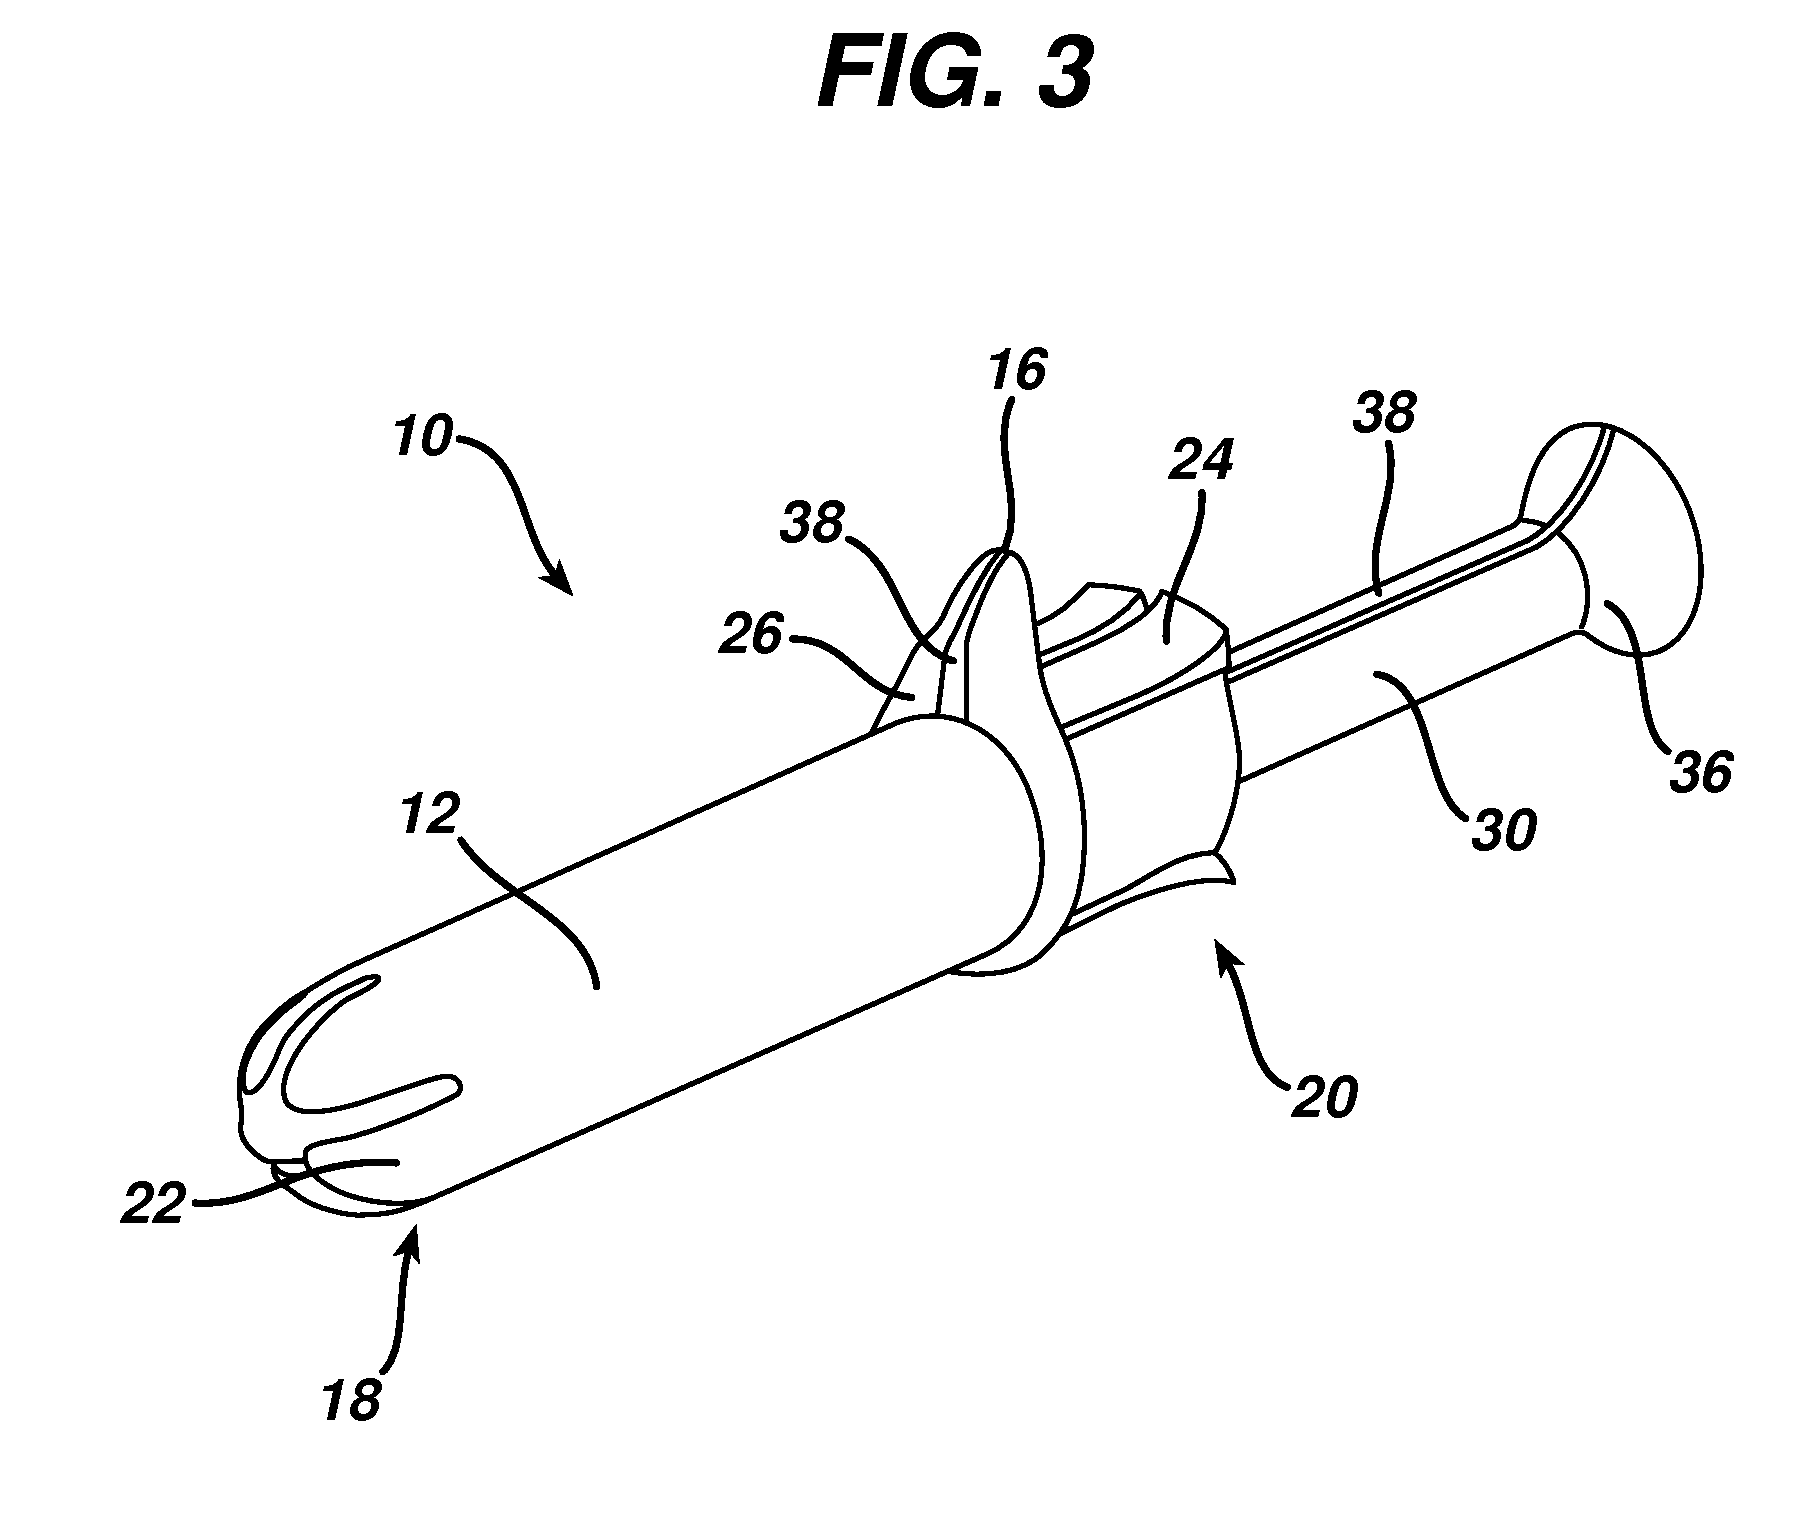 Adjustable applicator for urinary incontinence devices